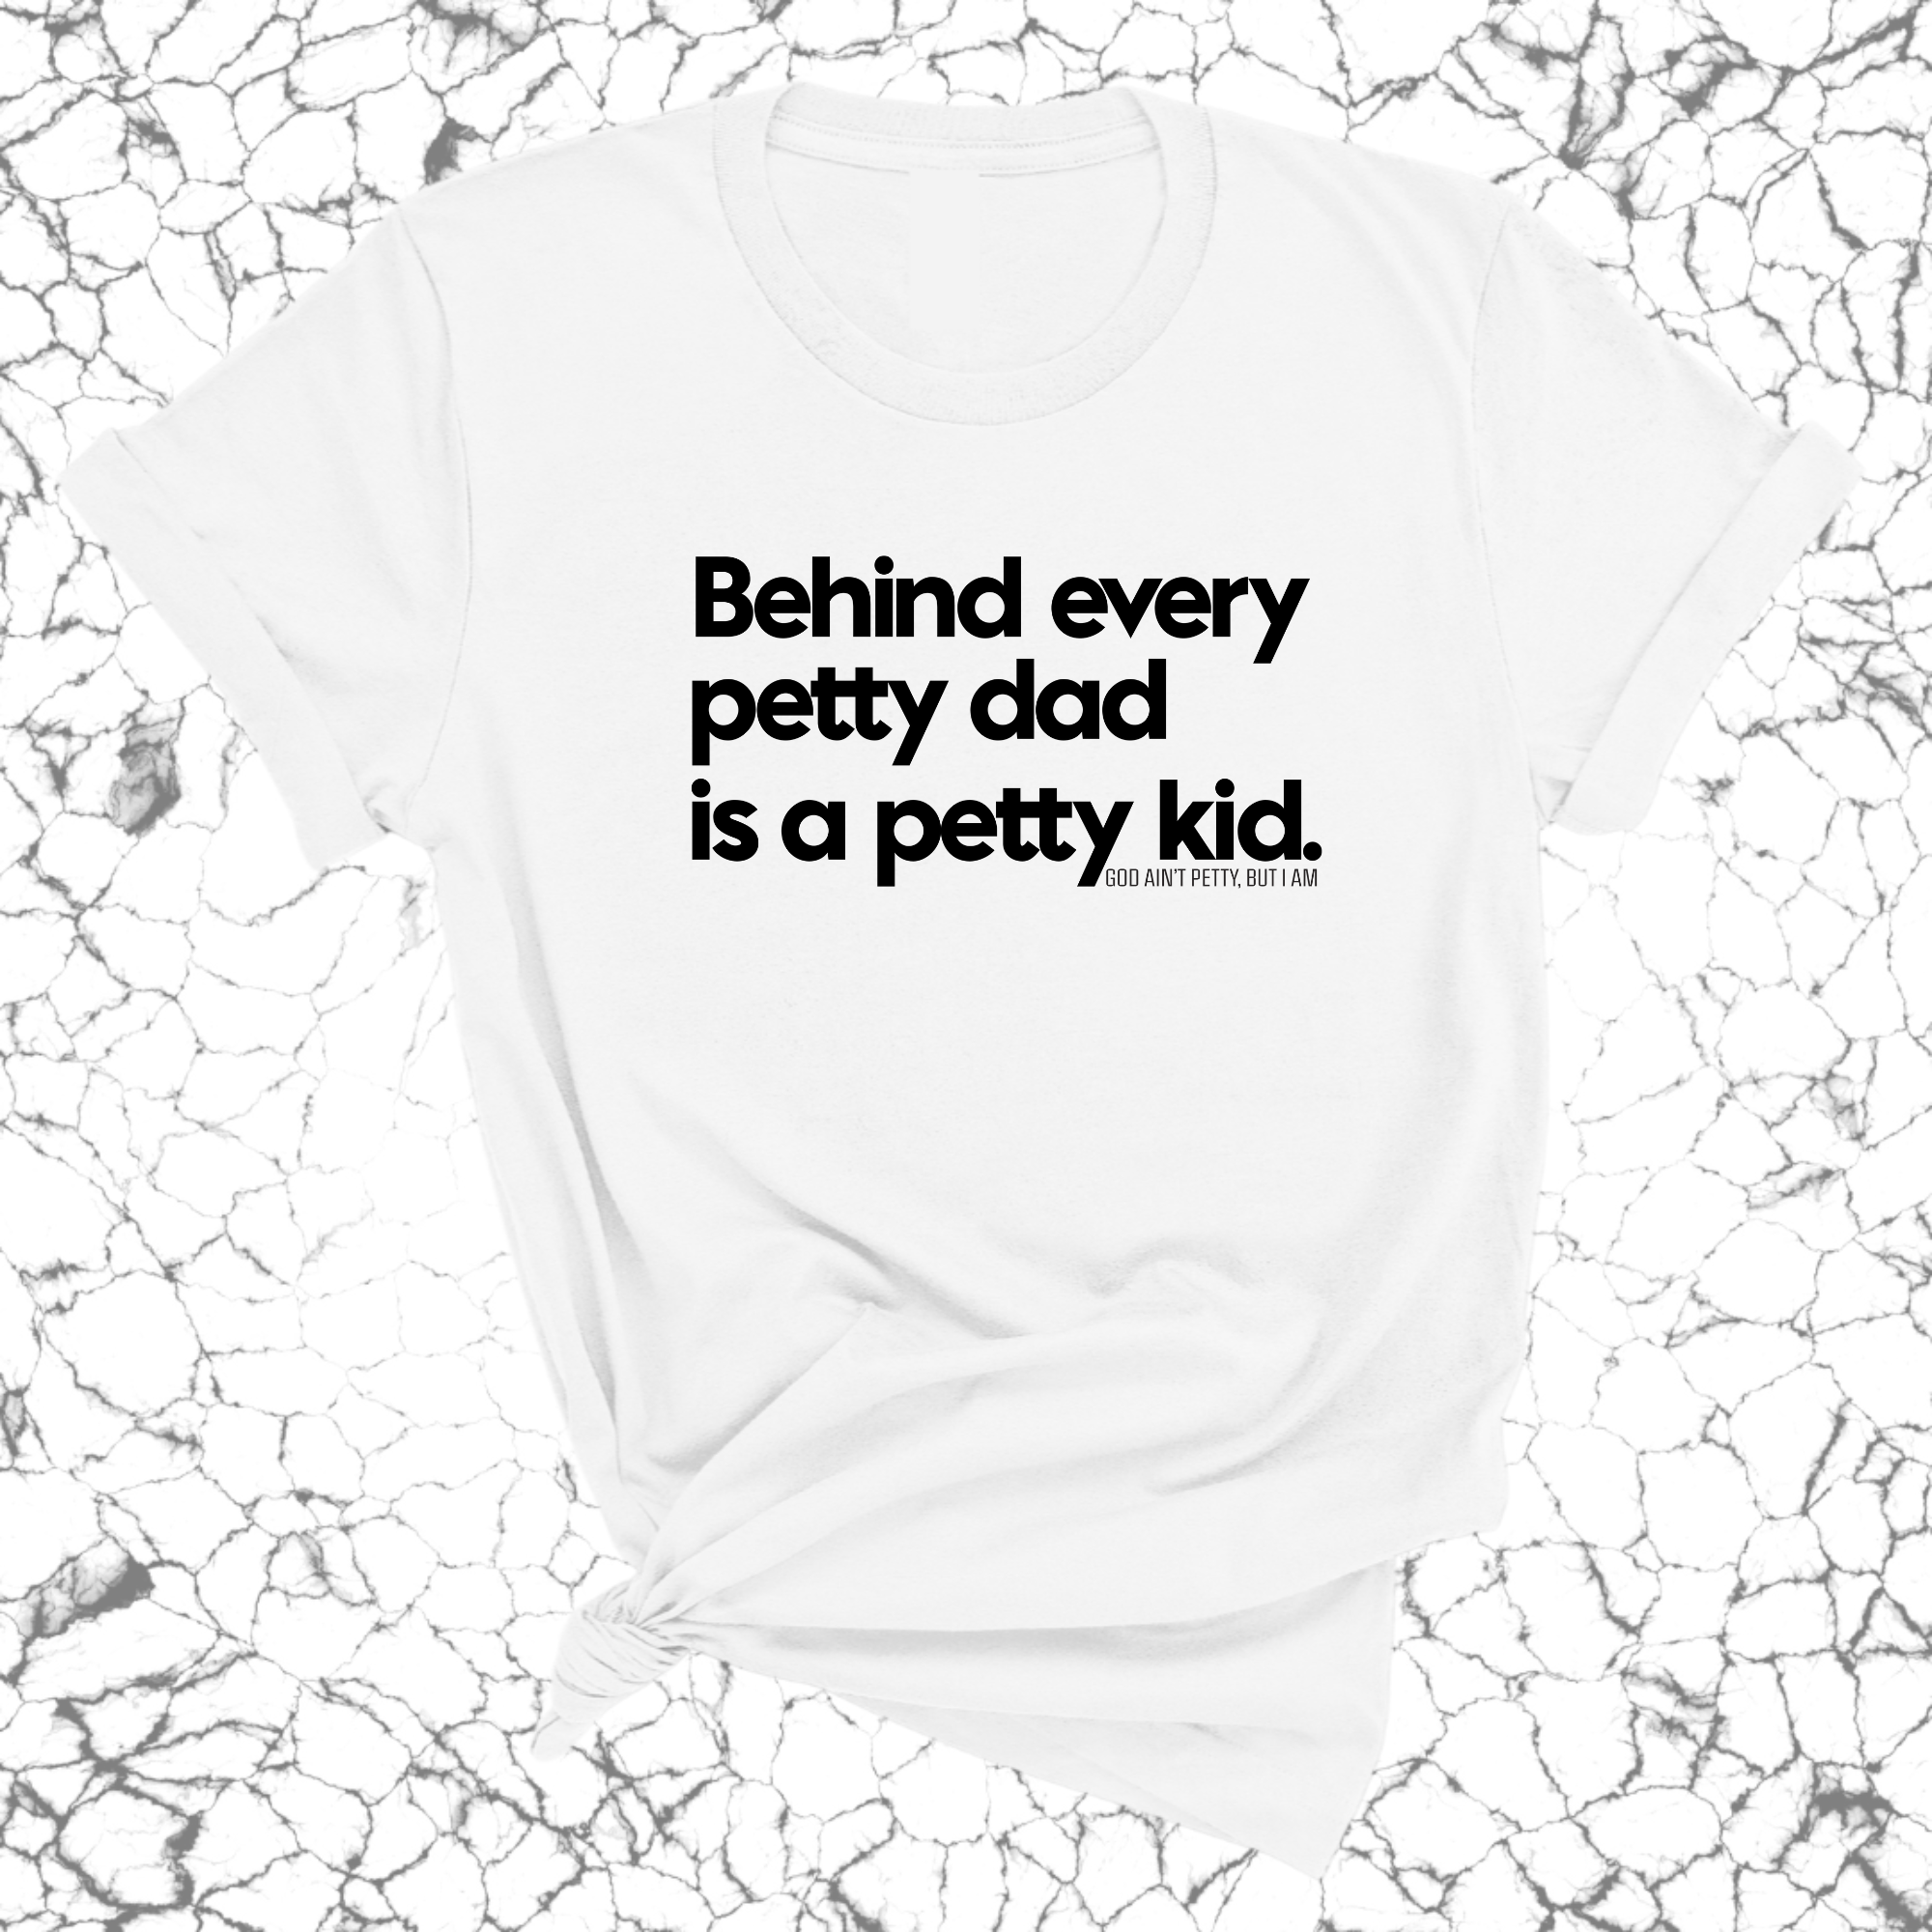 Behind every petty dad is a petty kid Unisex Tee-T-Shirt-The Original God Ain't Petty But I Am